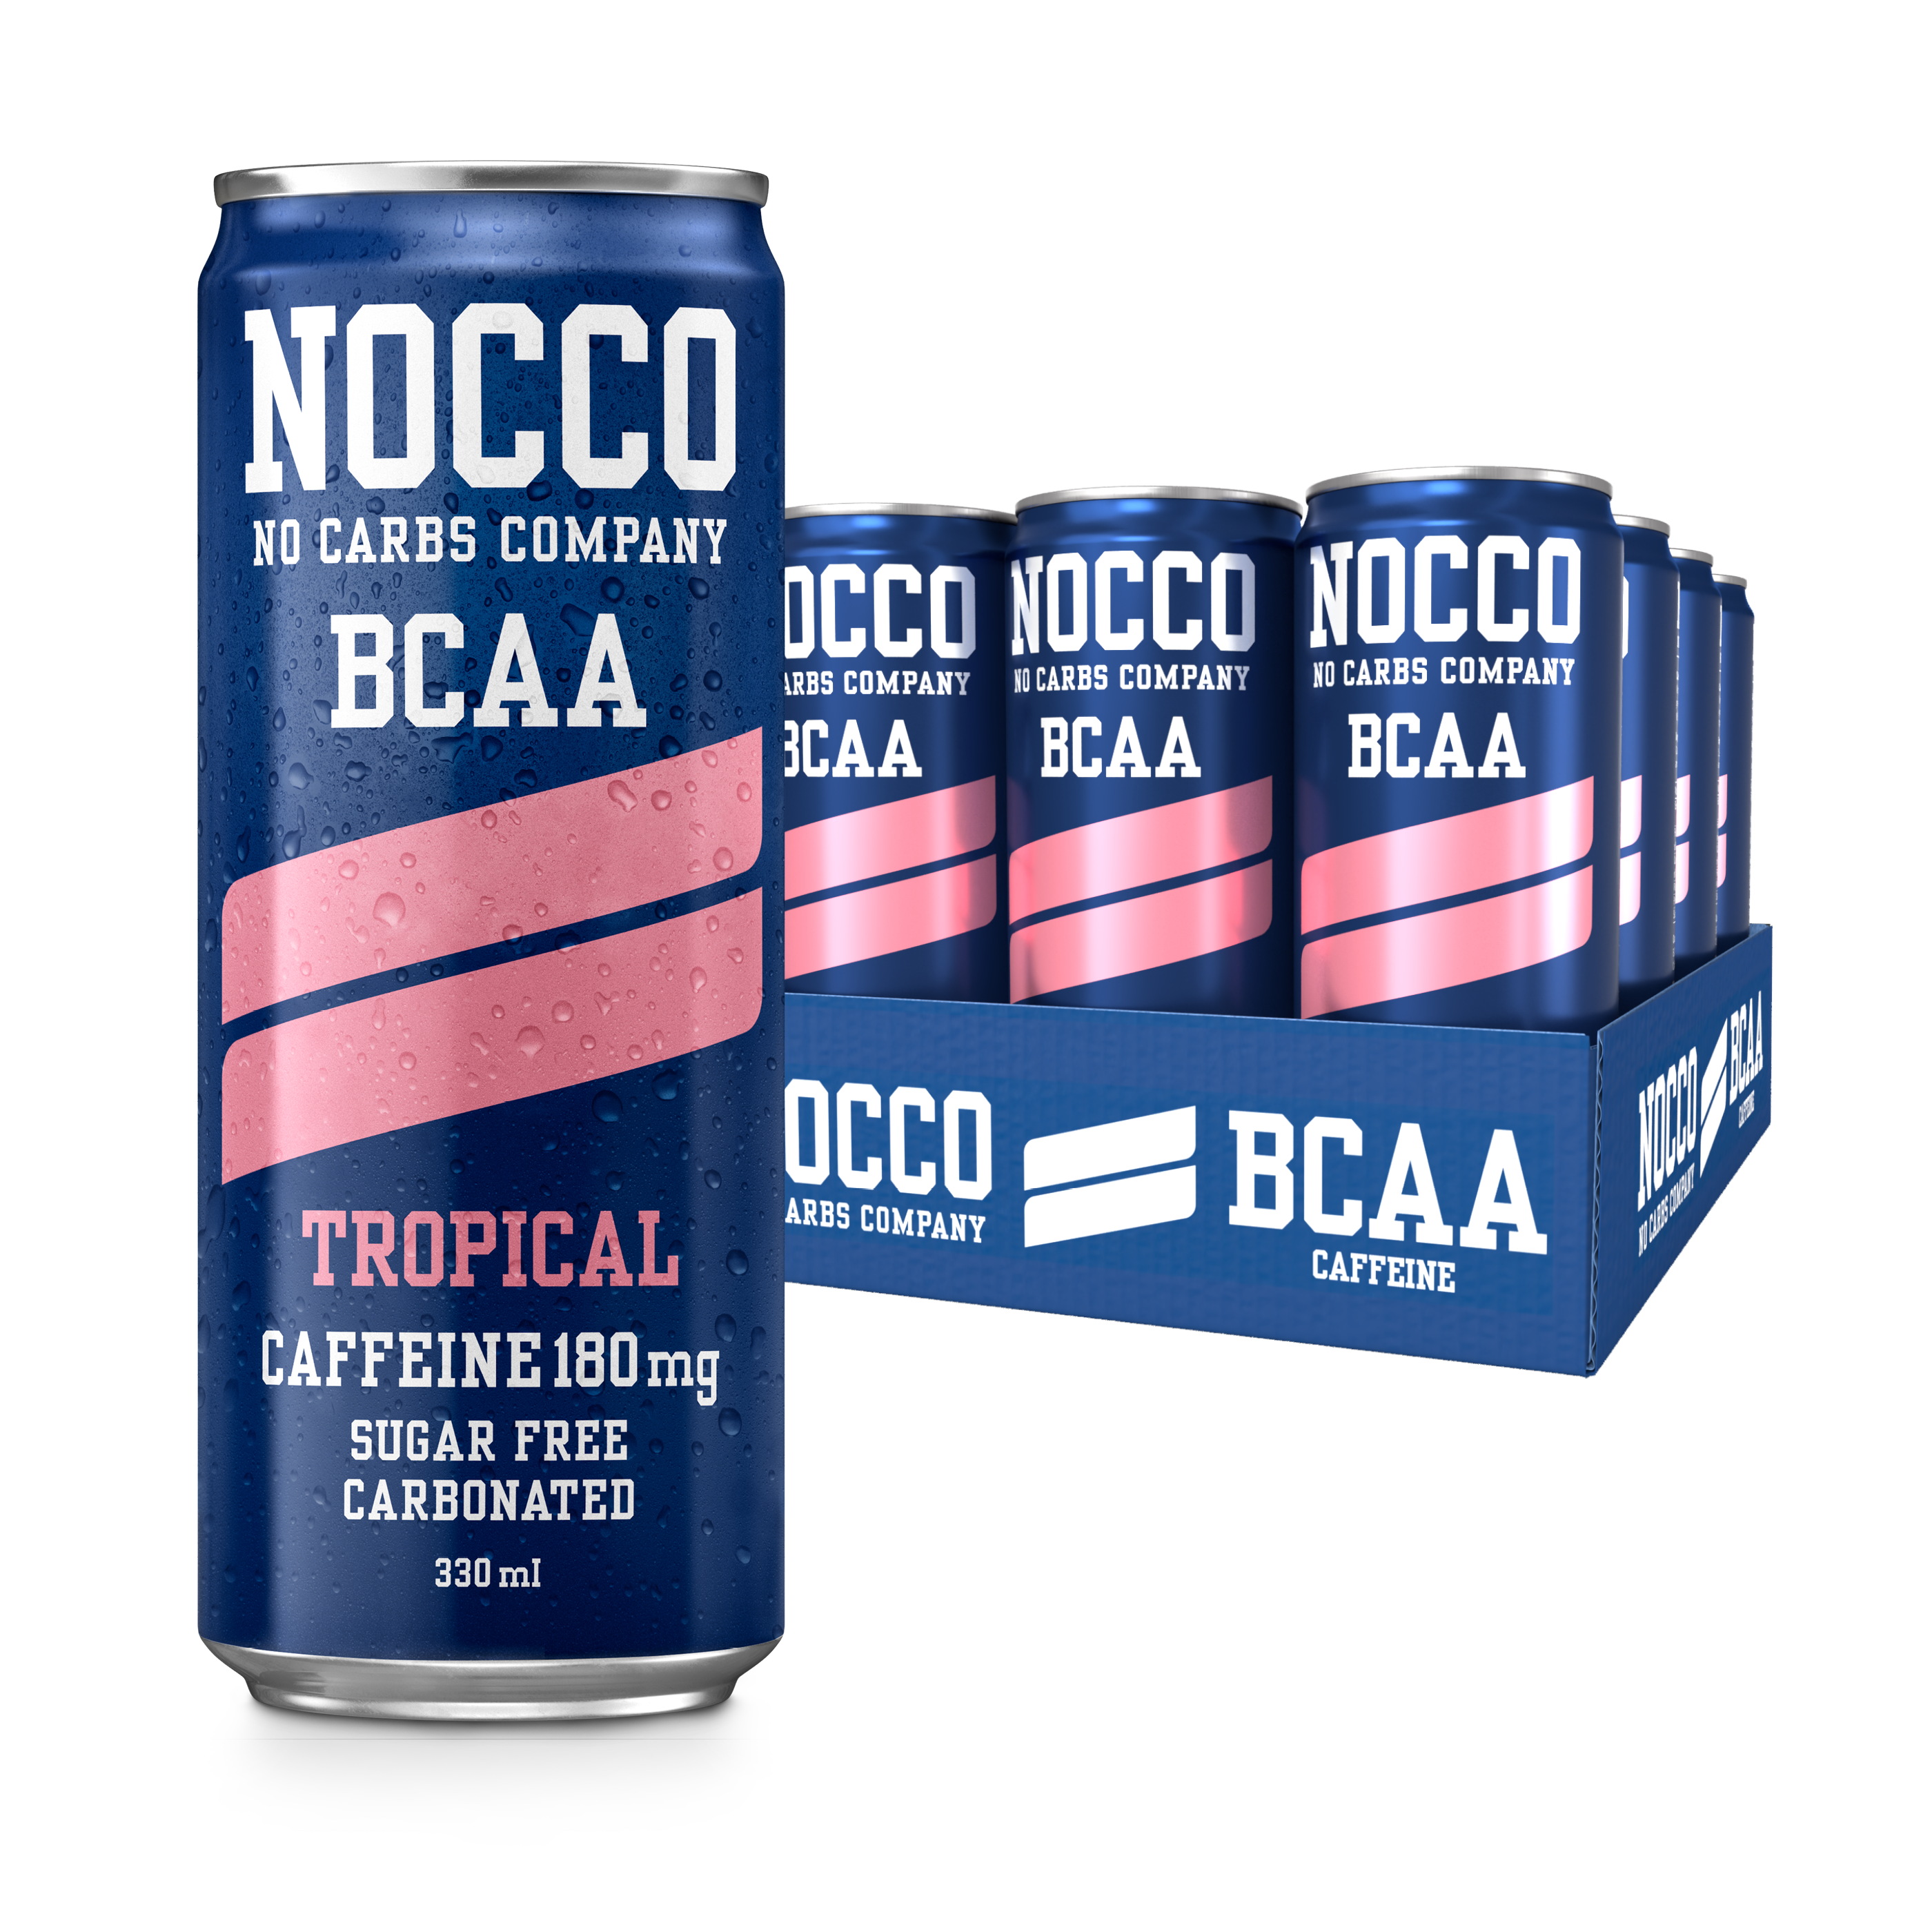 NOCCO Tropical 12-pack